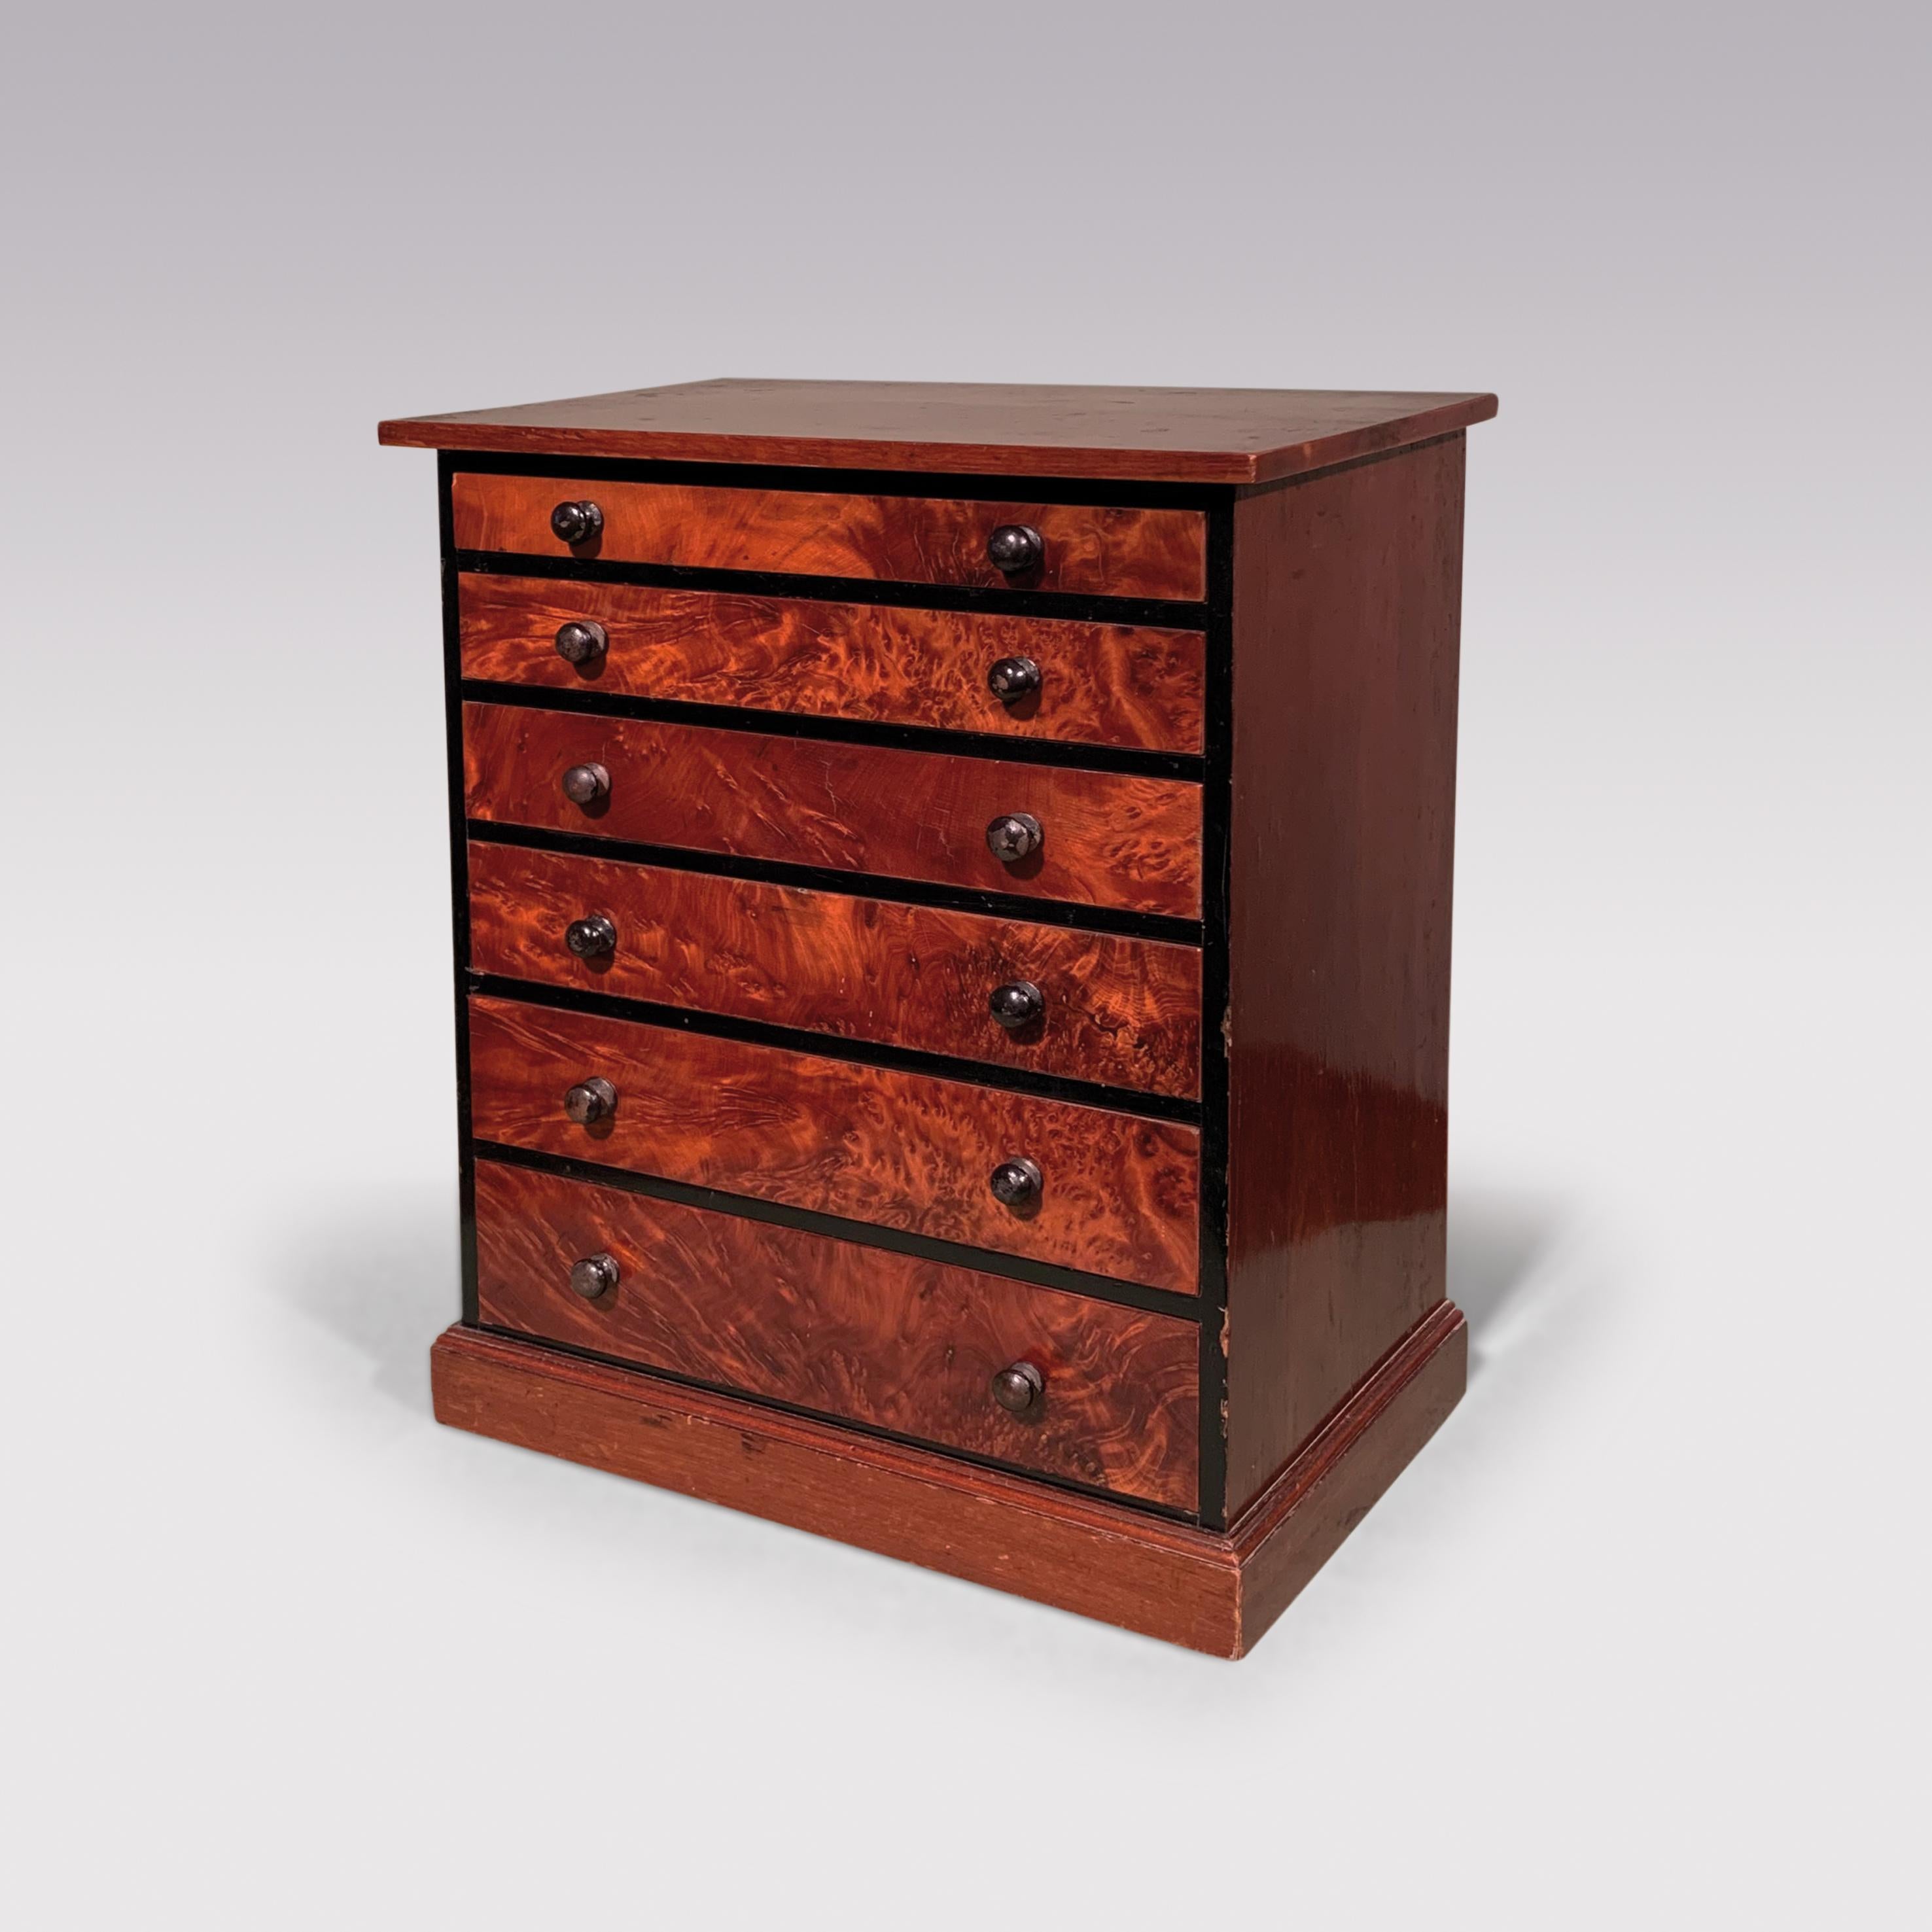 A 19th century flame figured mahogany Collector’s cabinet, having 6 drawers with ebony handles & drawer divisions, the partitions containing specimen shells of all shapes & sizes.